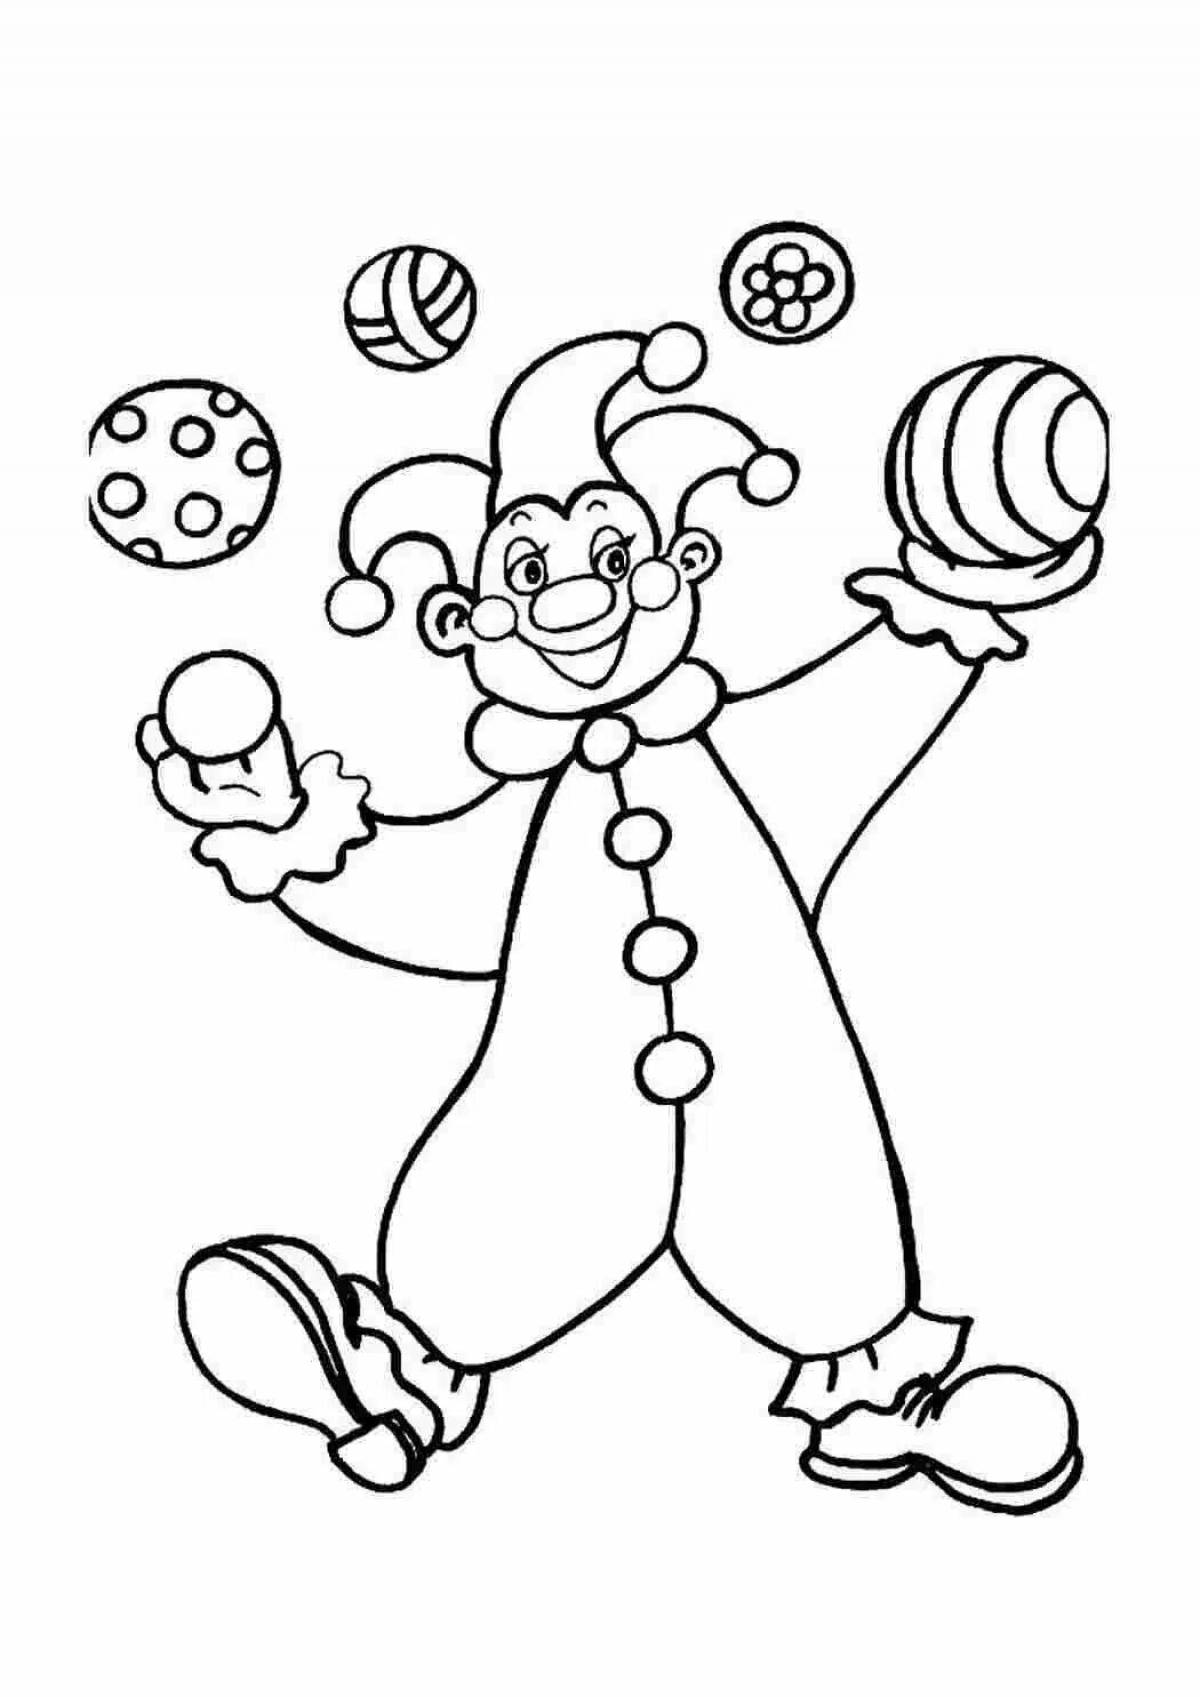 Great coloring book visiting a clown